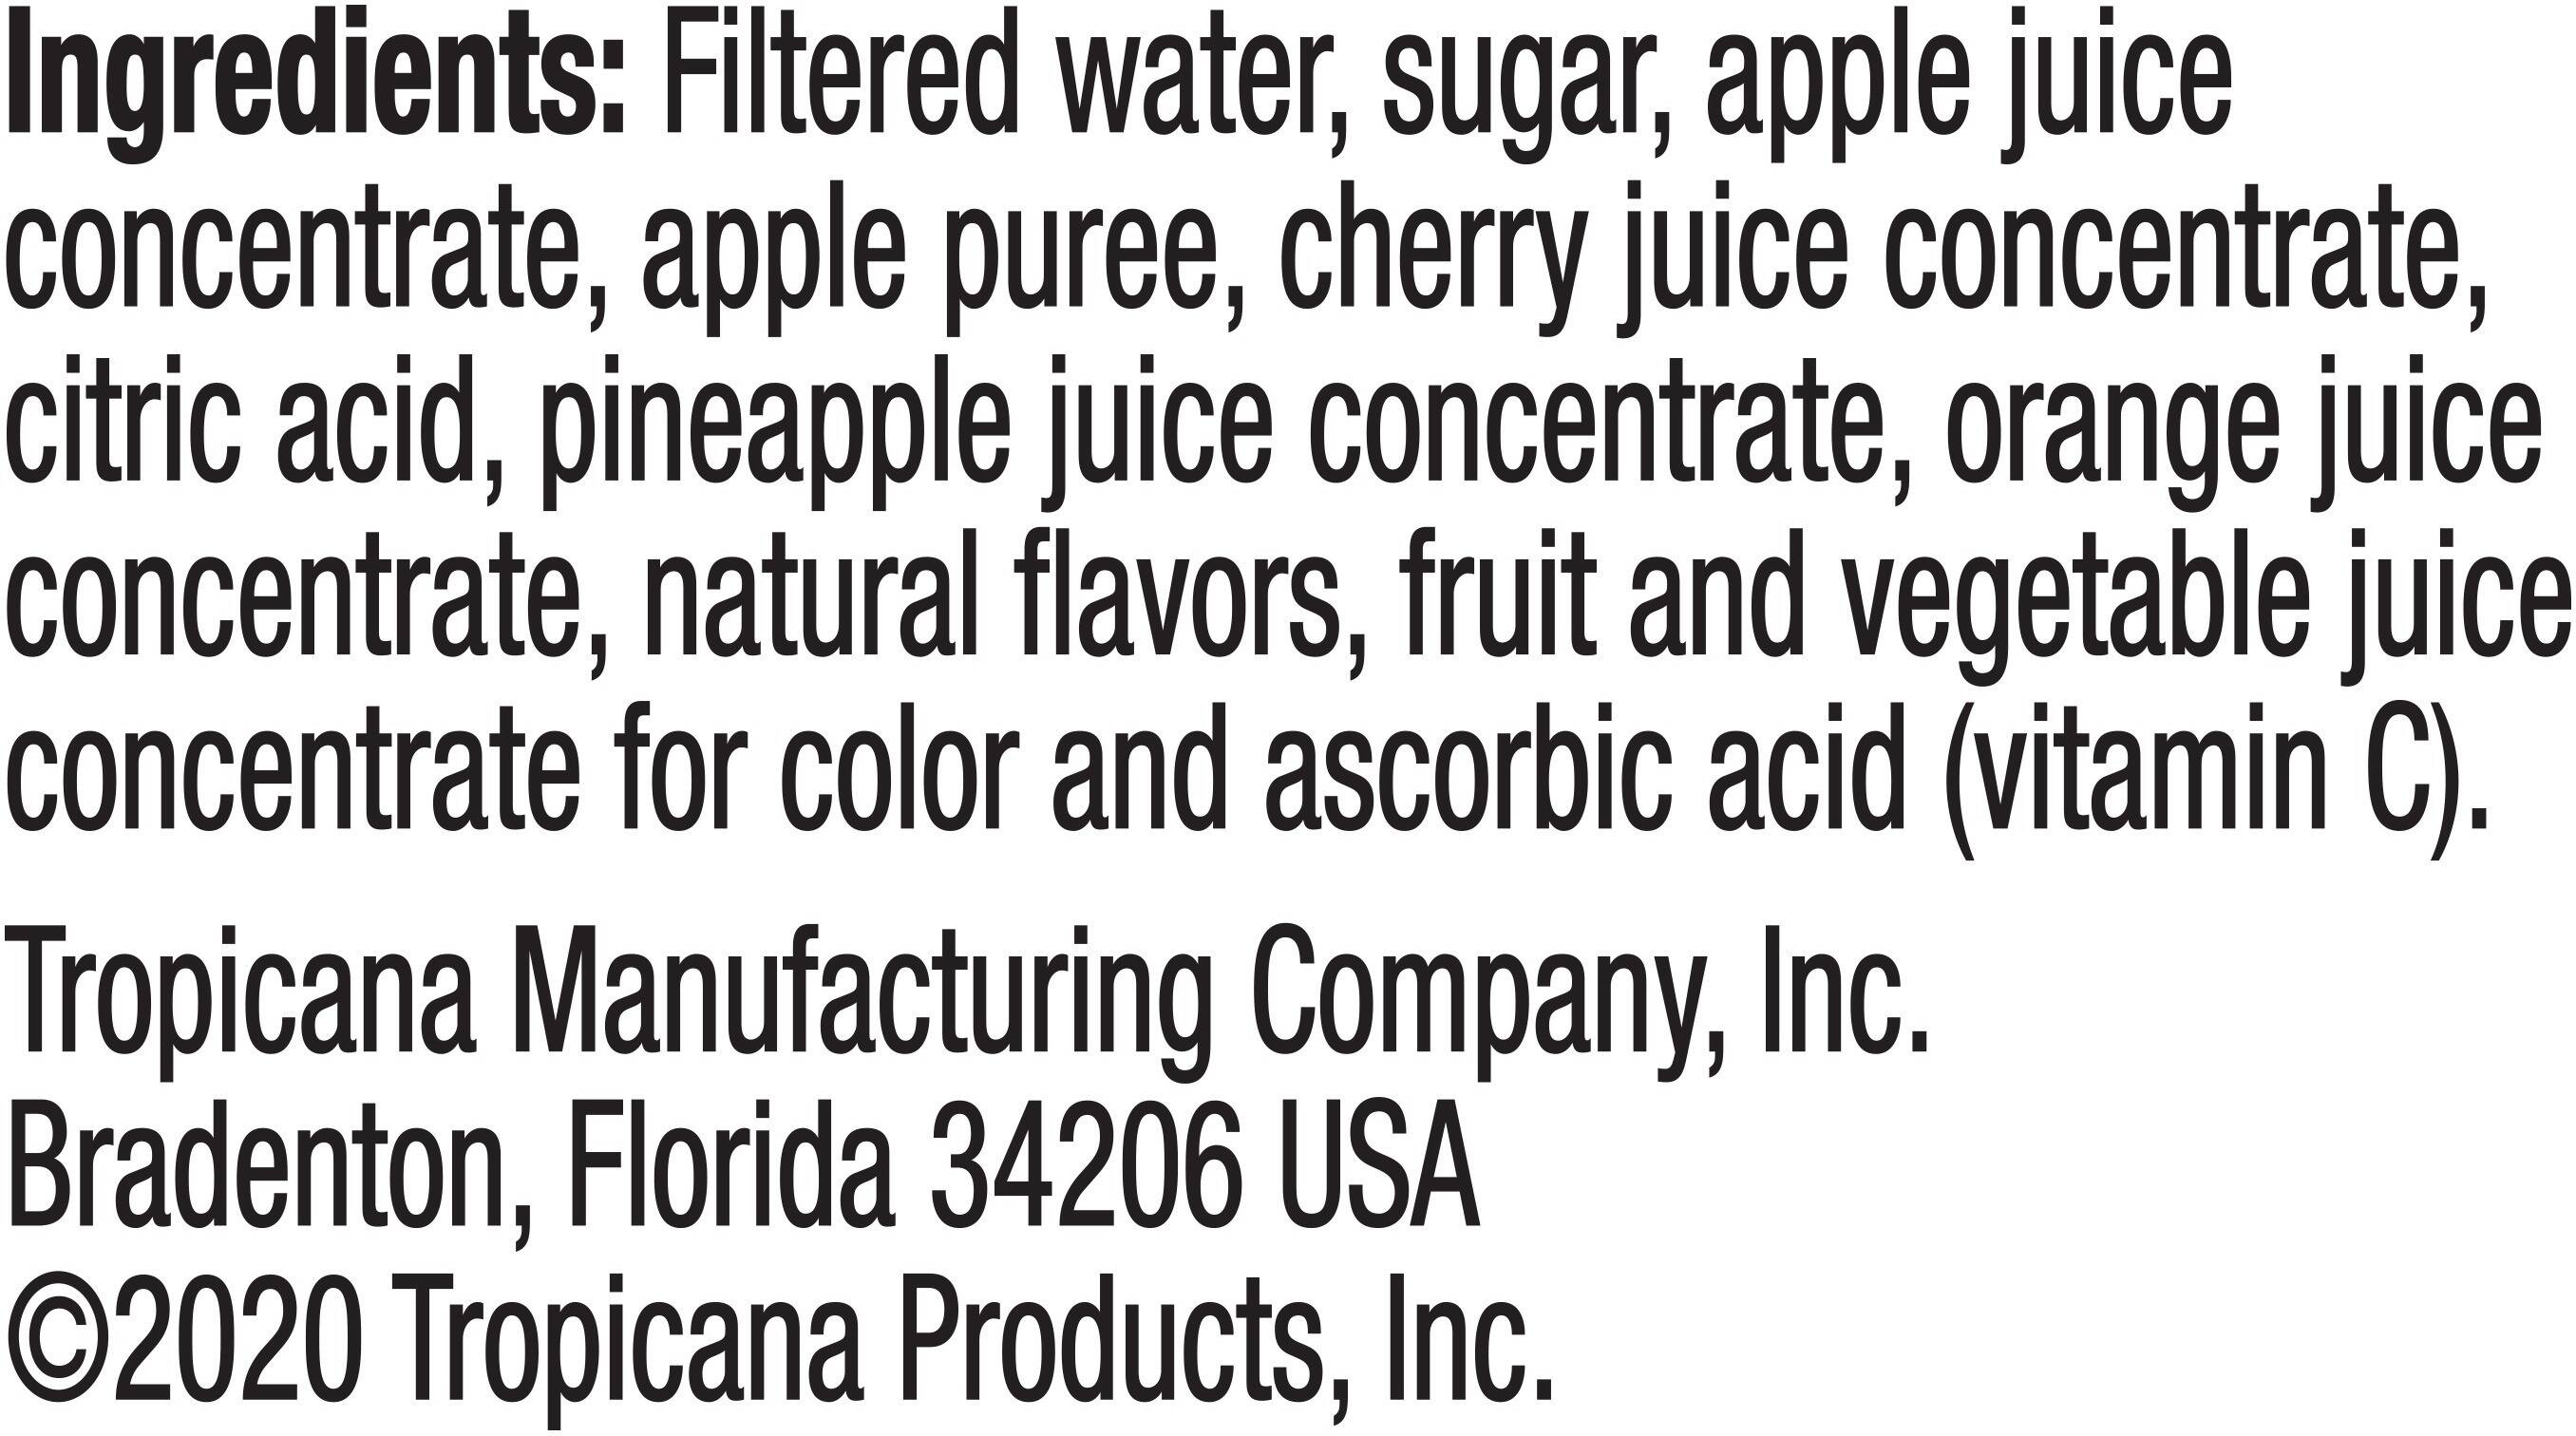 Image describing nutrition information for product Tropicana Caribbean Sunset